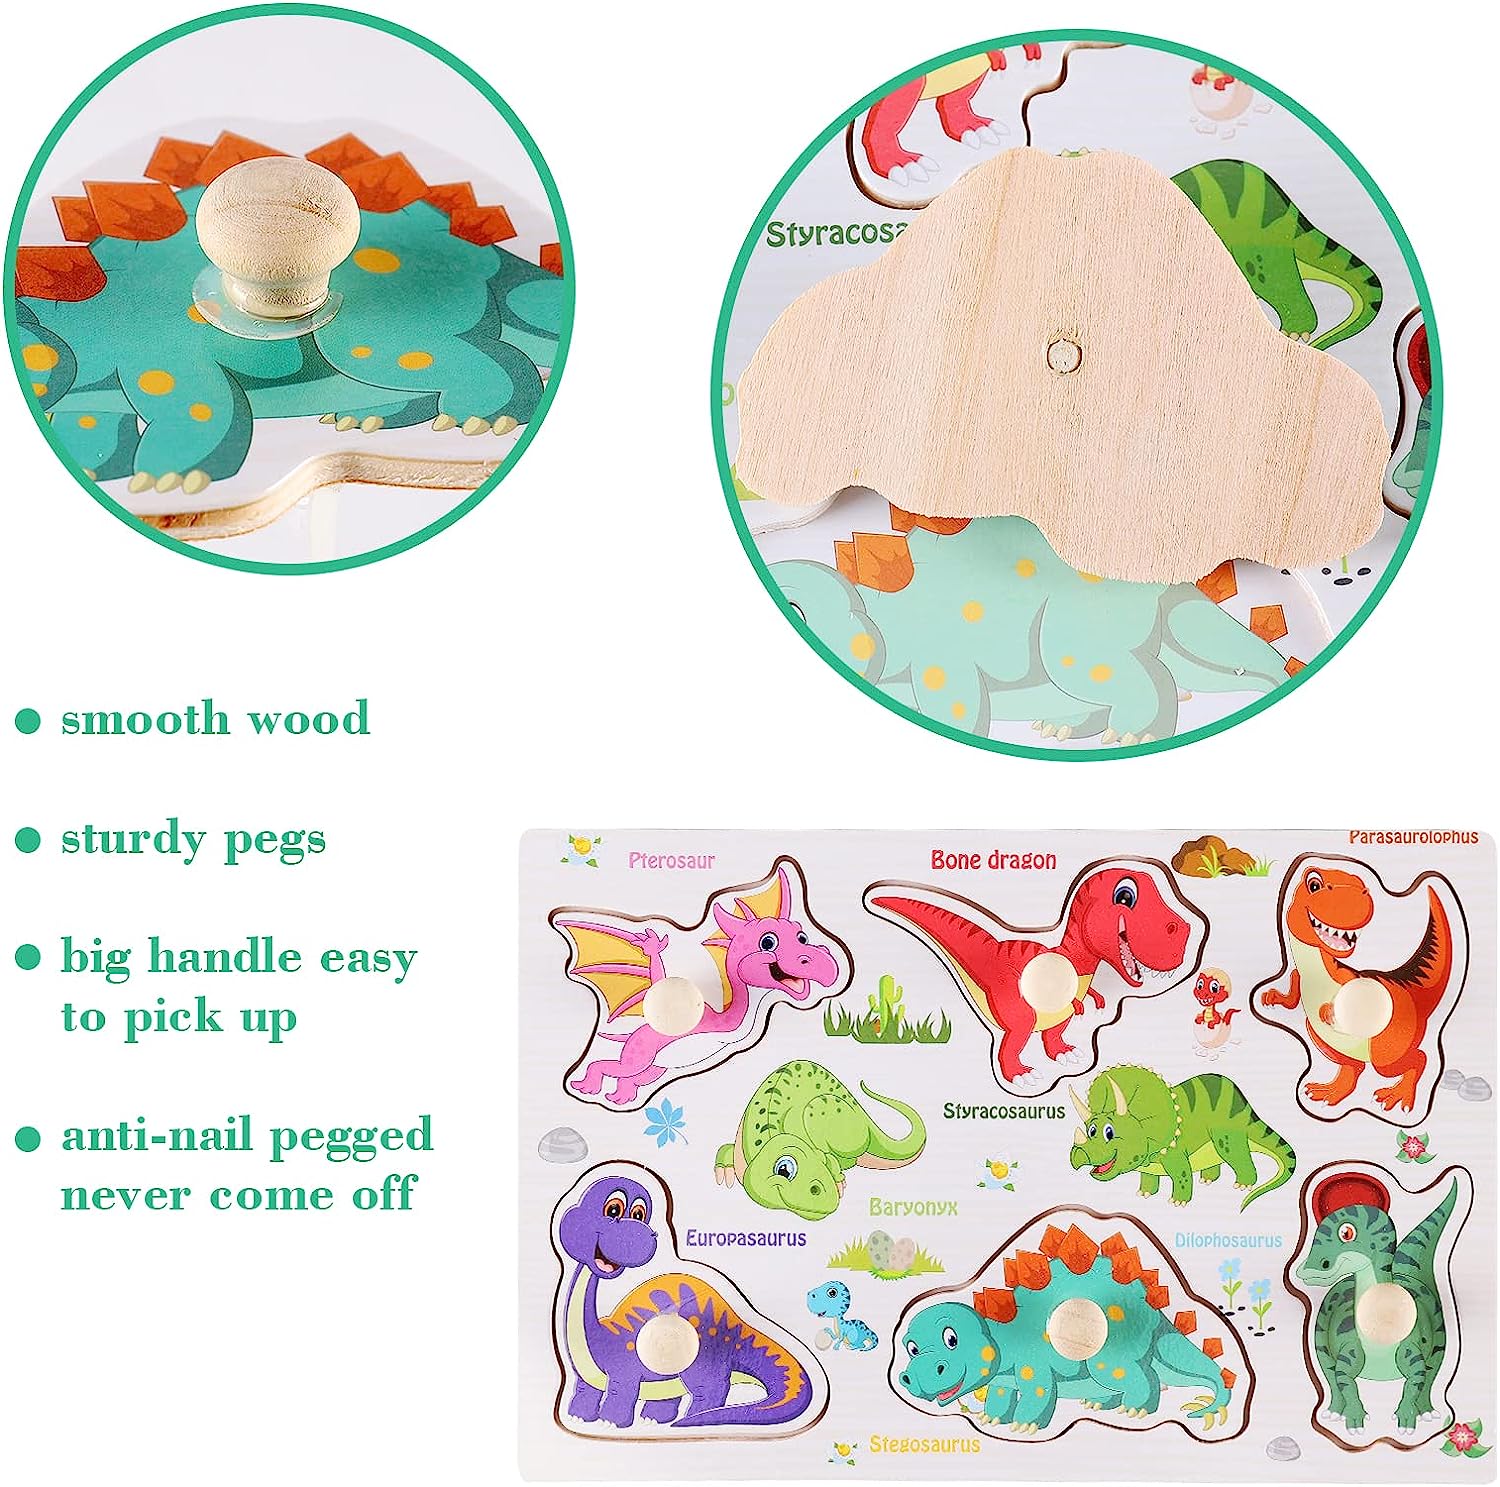 Wooden Peg Puzzles for Toddlers: A Review of an Educational and Engaging Toy